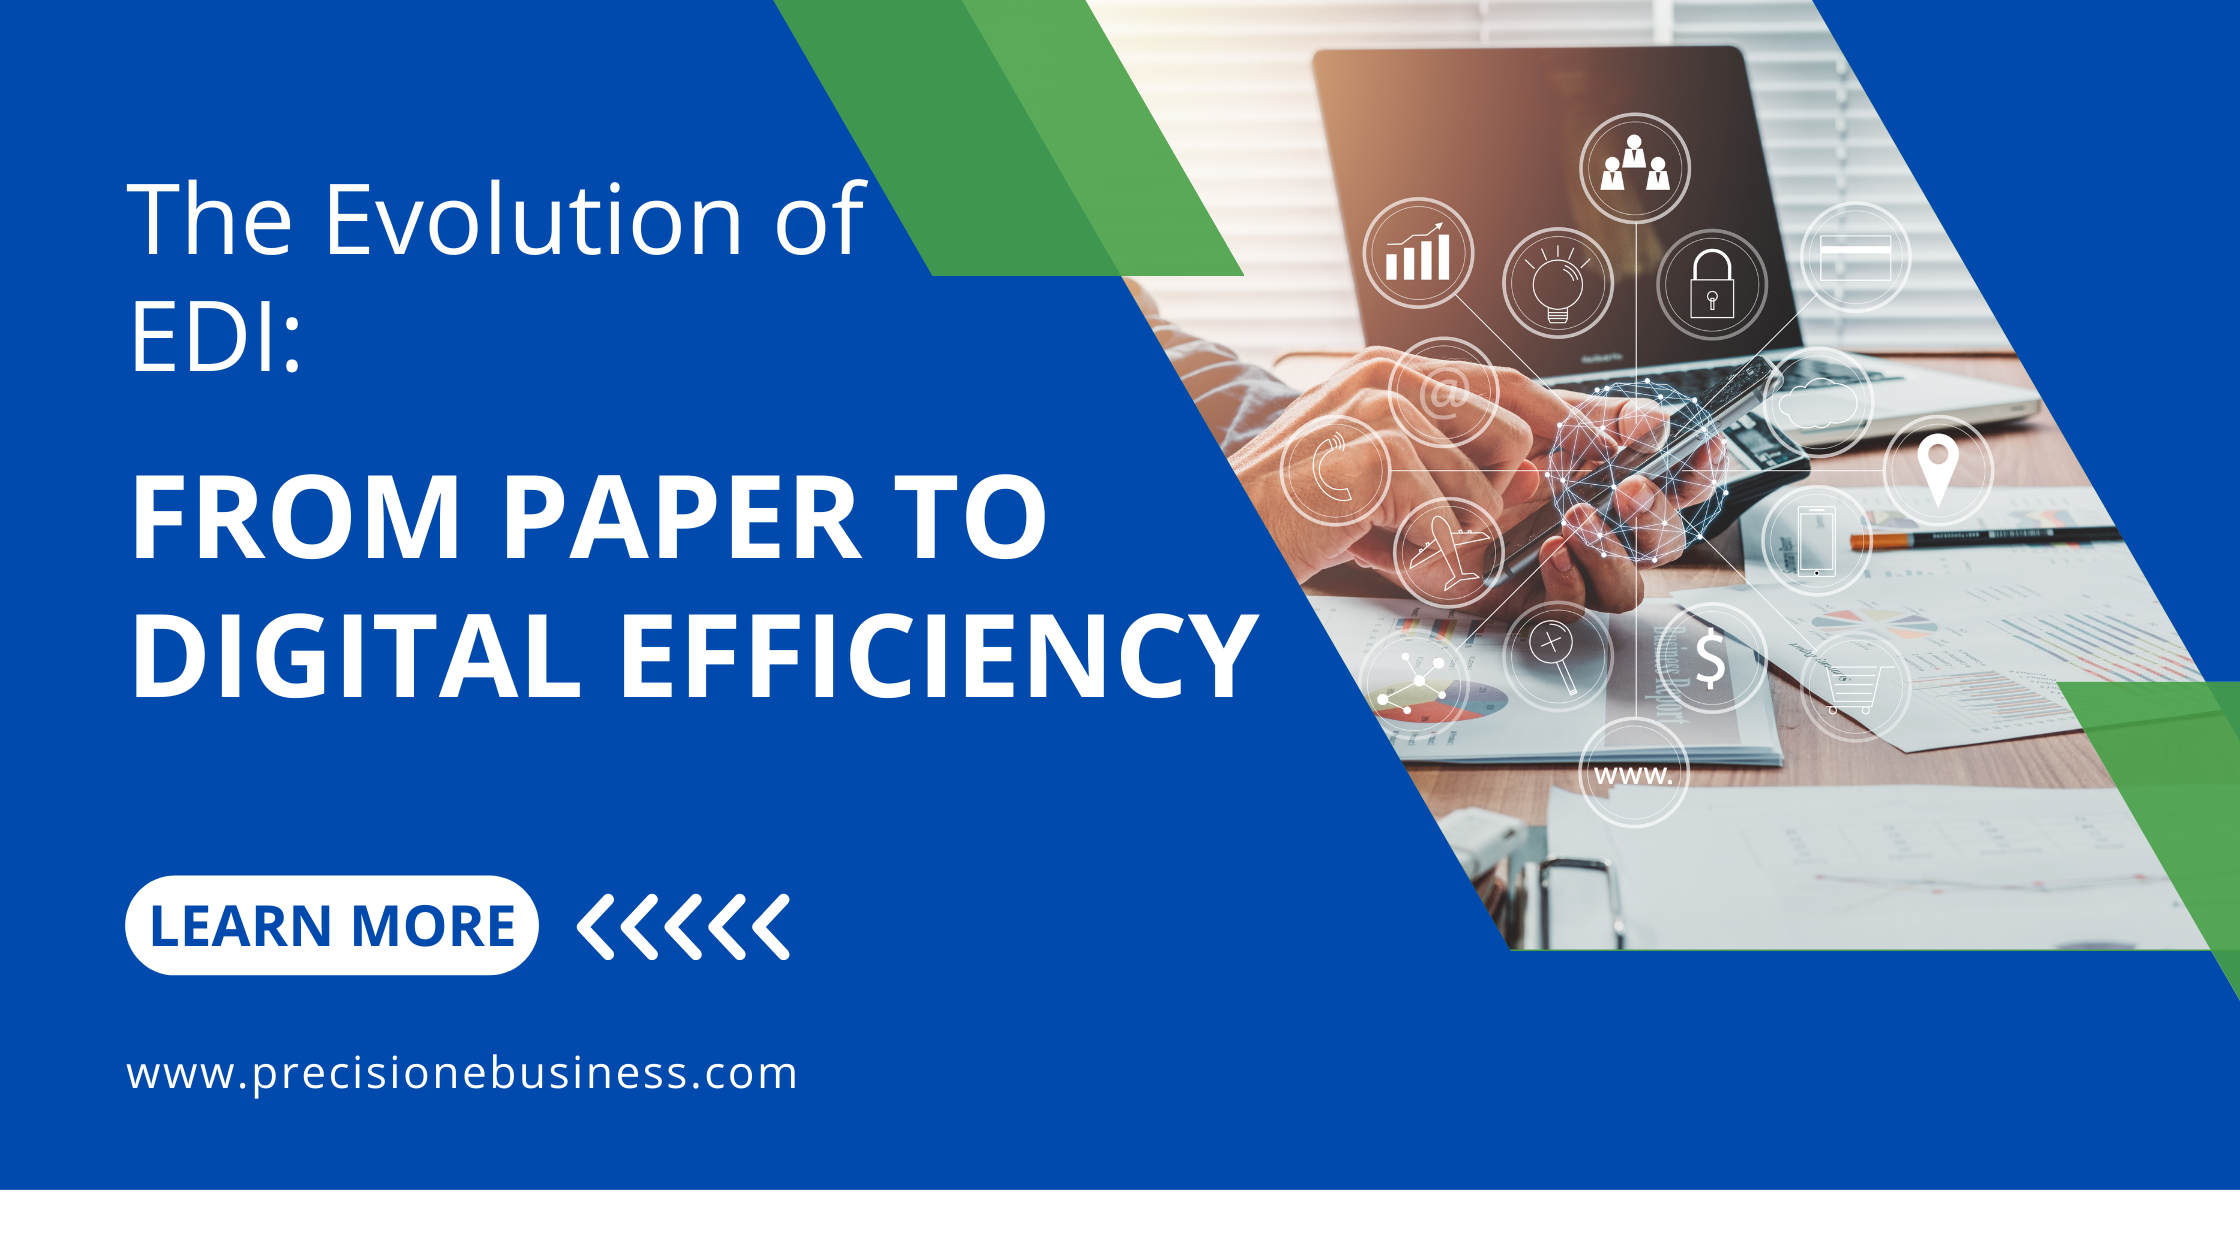 The Evolution of EDI: From Paper to Digital Efficiency